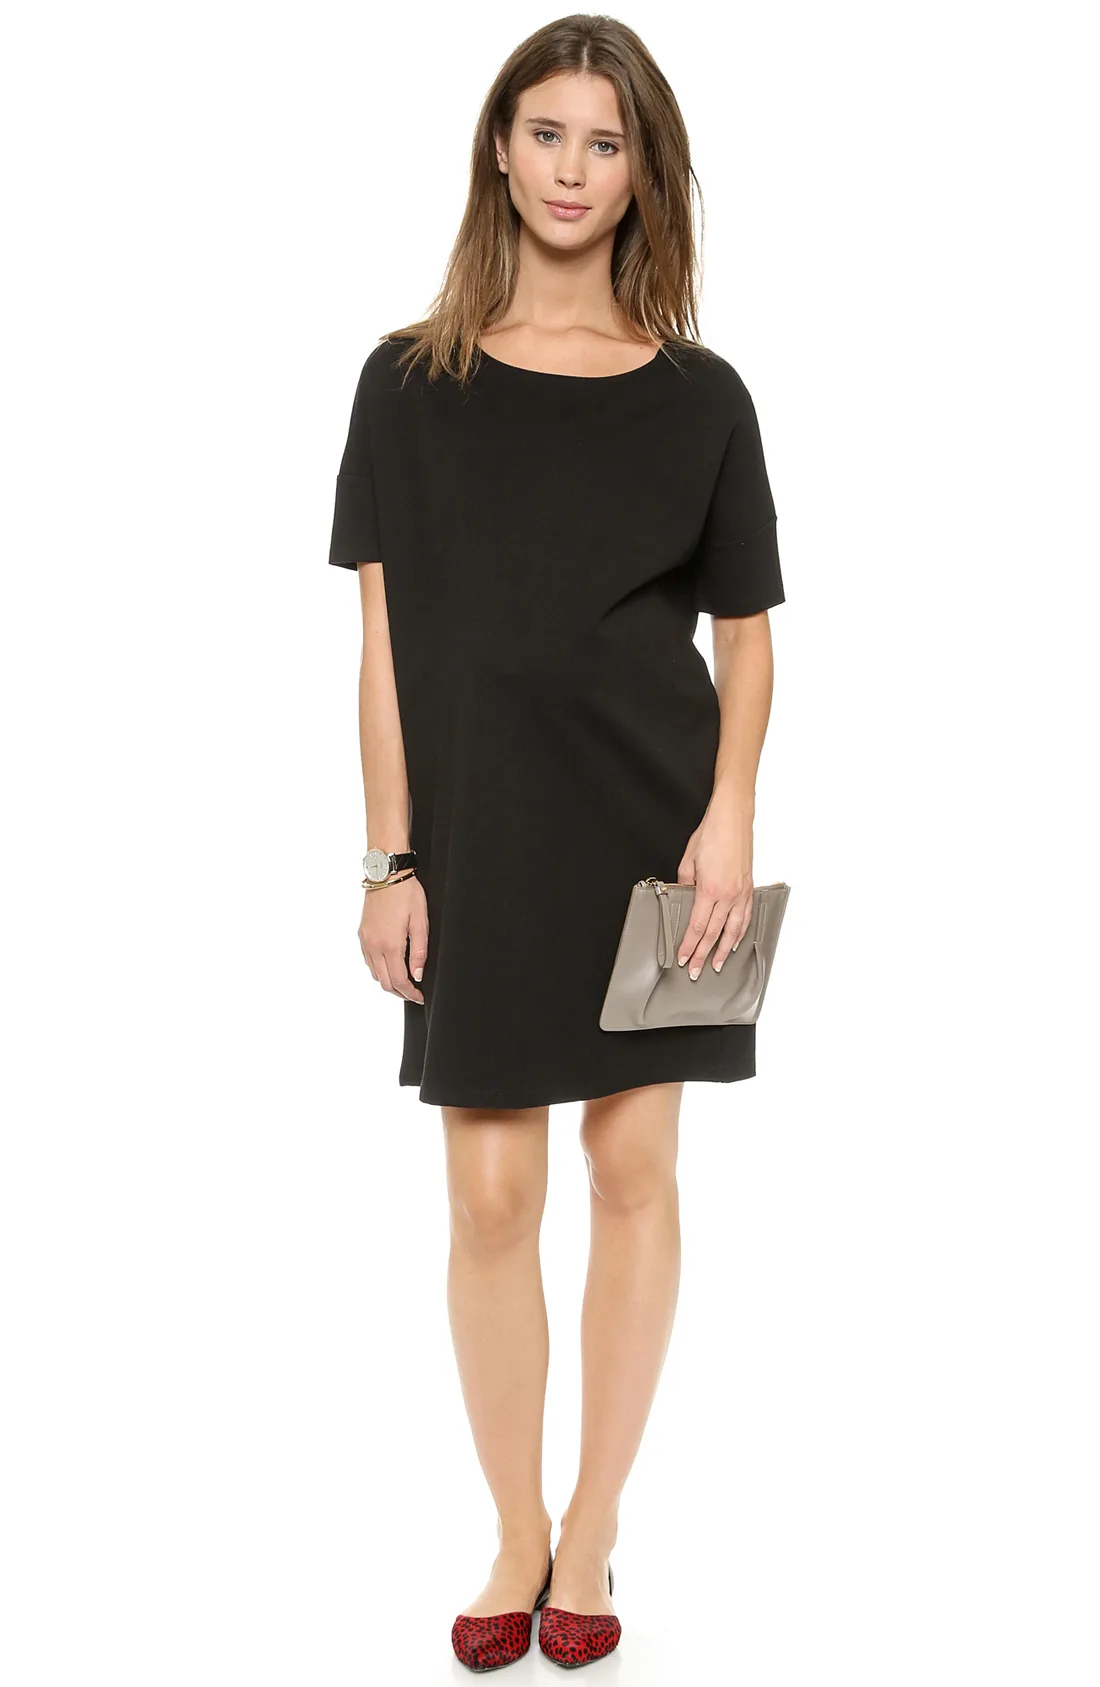 The Afternoon Dress from Shopbop